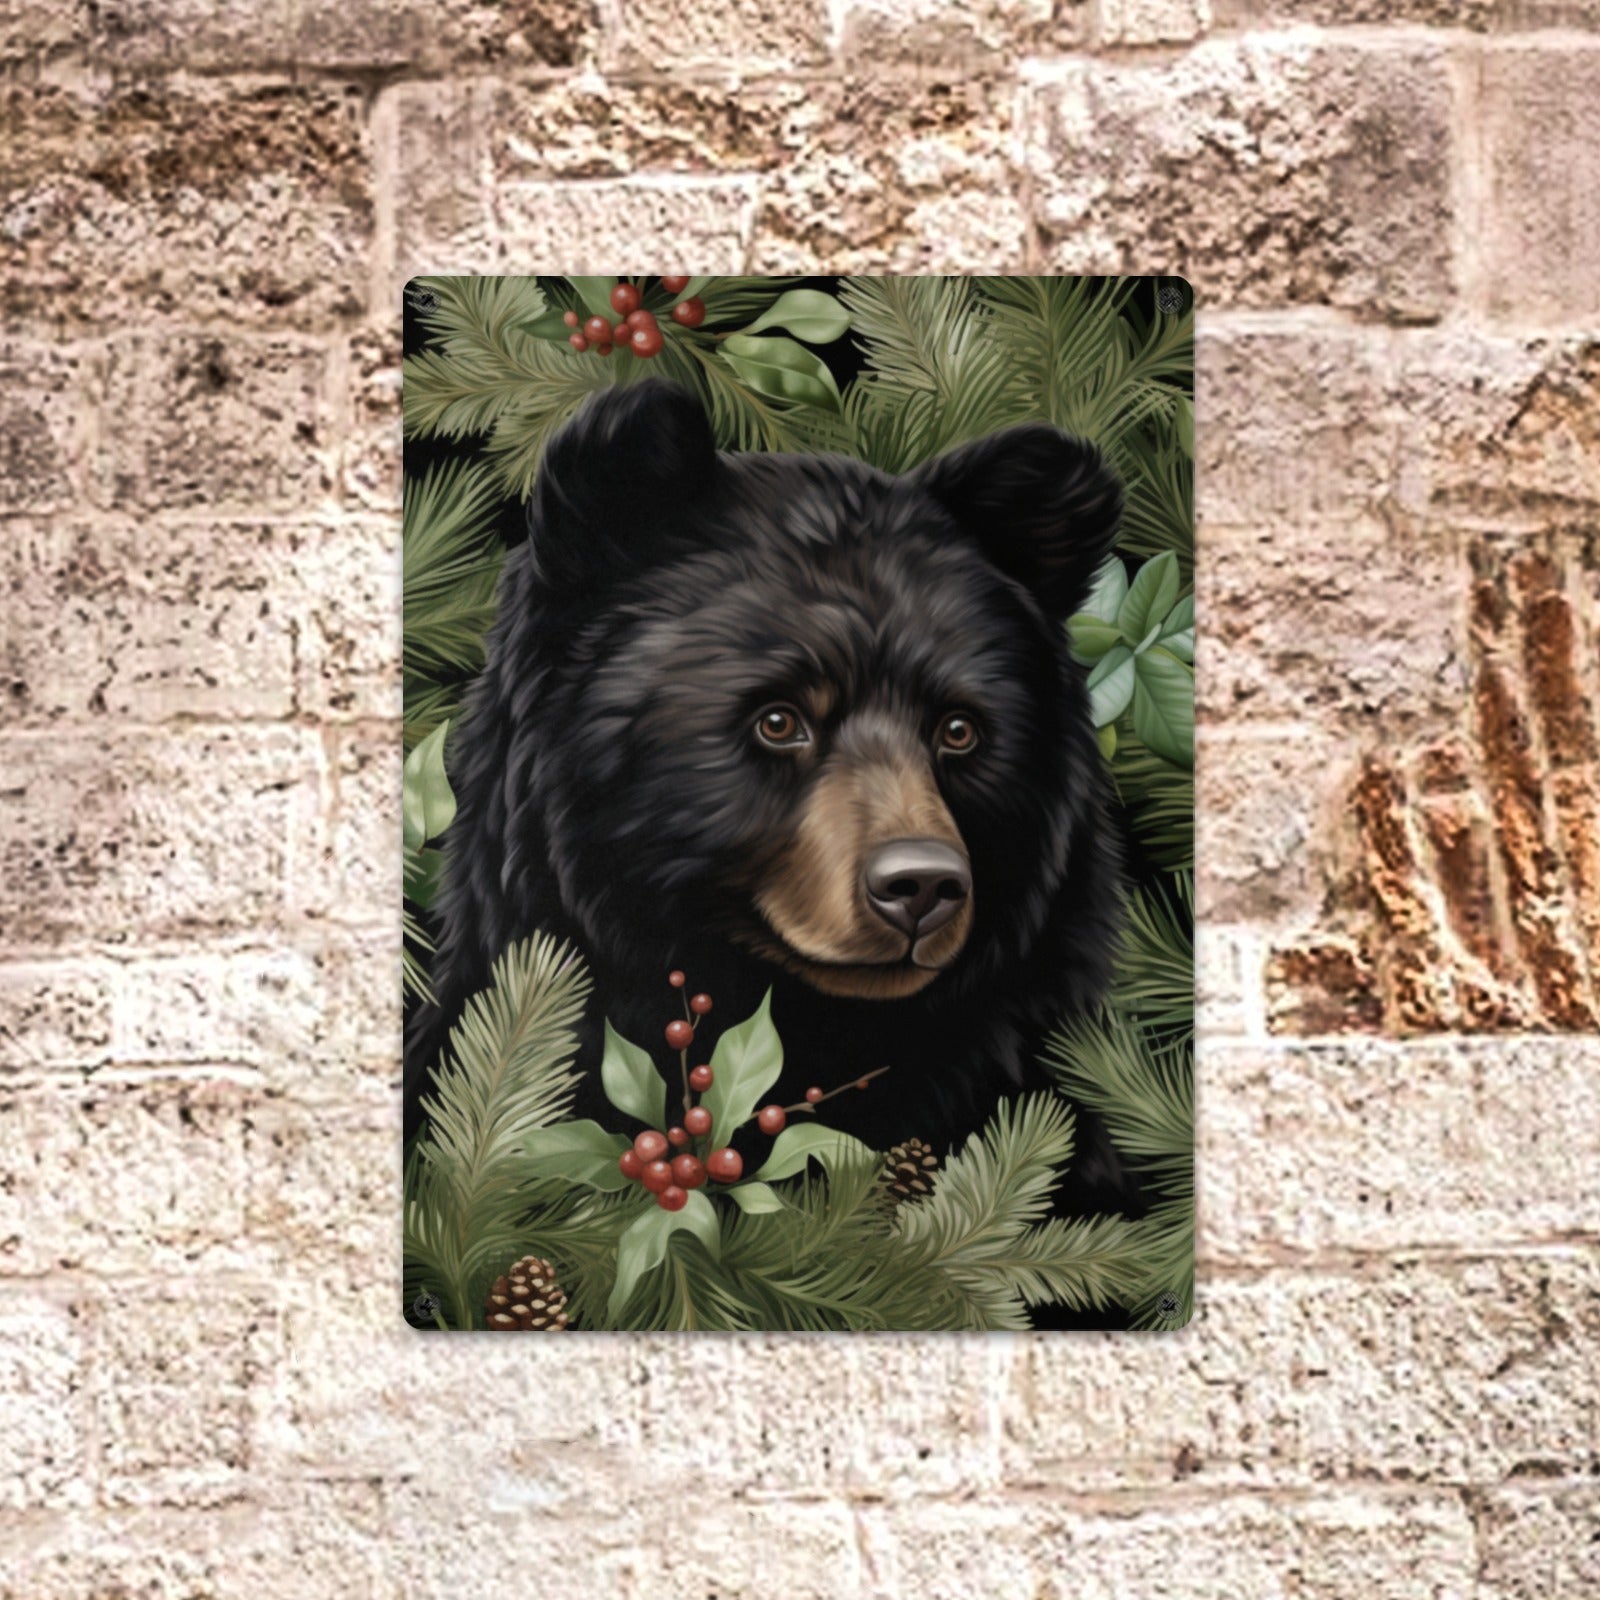 Rustic Lodge Home Decor Holly Black Bear Sign Indoor / Outdoor Metal Tin Sign 12"x16"